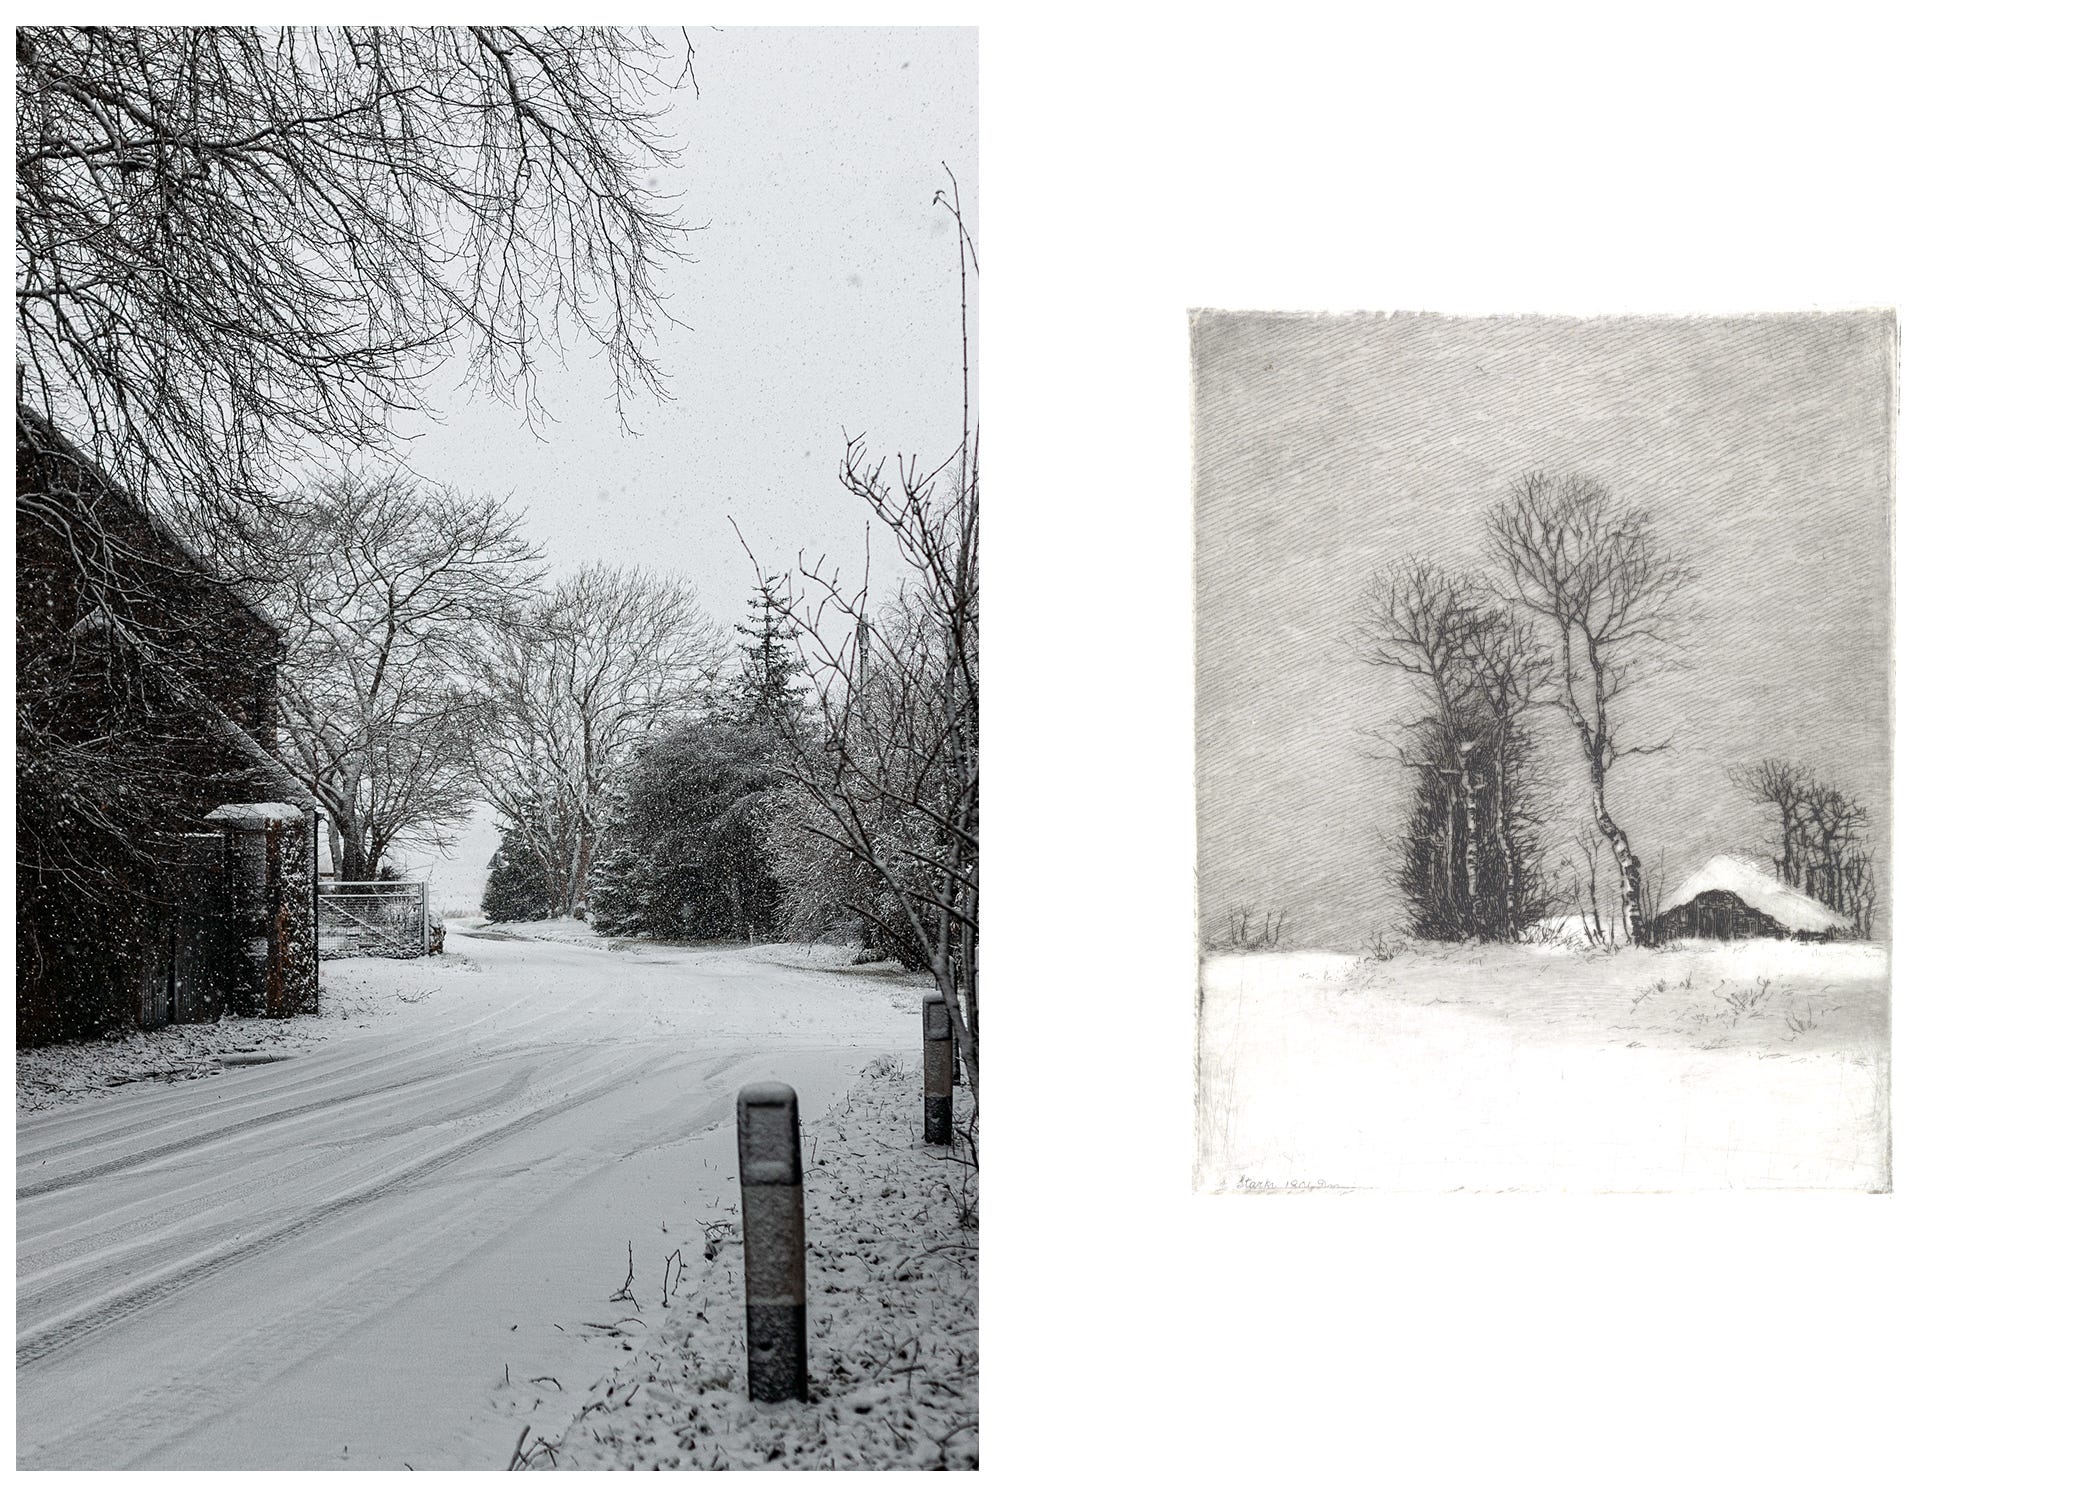 Left photograph is a country lane covered in snow and lined with trees, the snow is falling heavily and the side of a cottage can be seen around the corner. The right image is an etching of a snowy country scene, a cottage is in the background surrounded by trees and the foreground is filled with snow. 